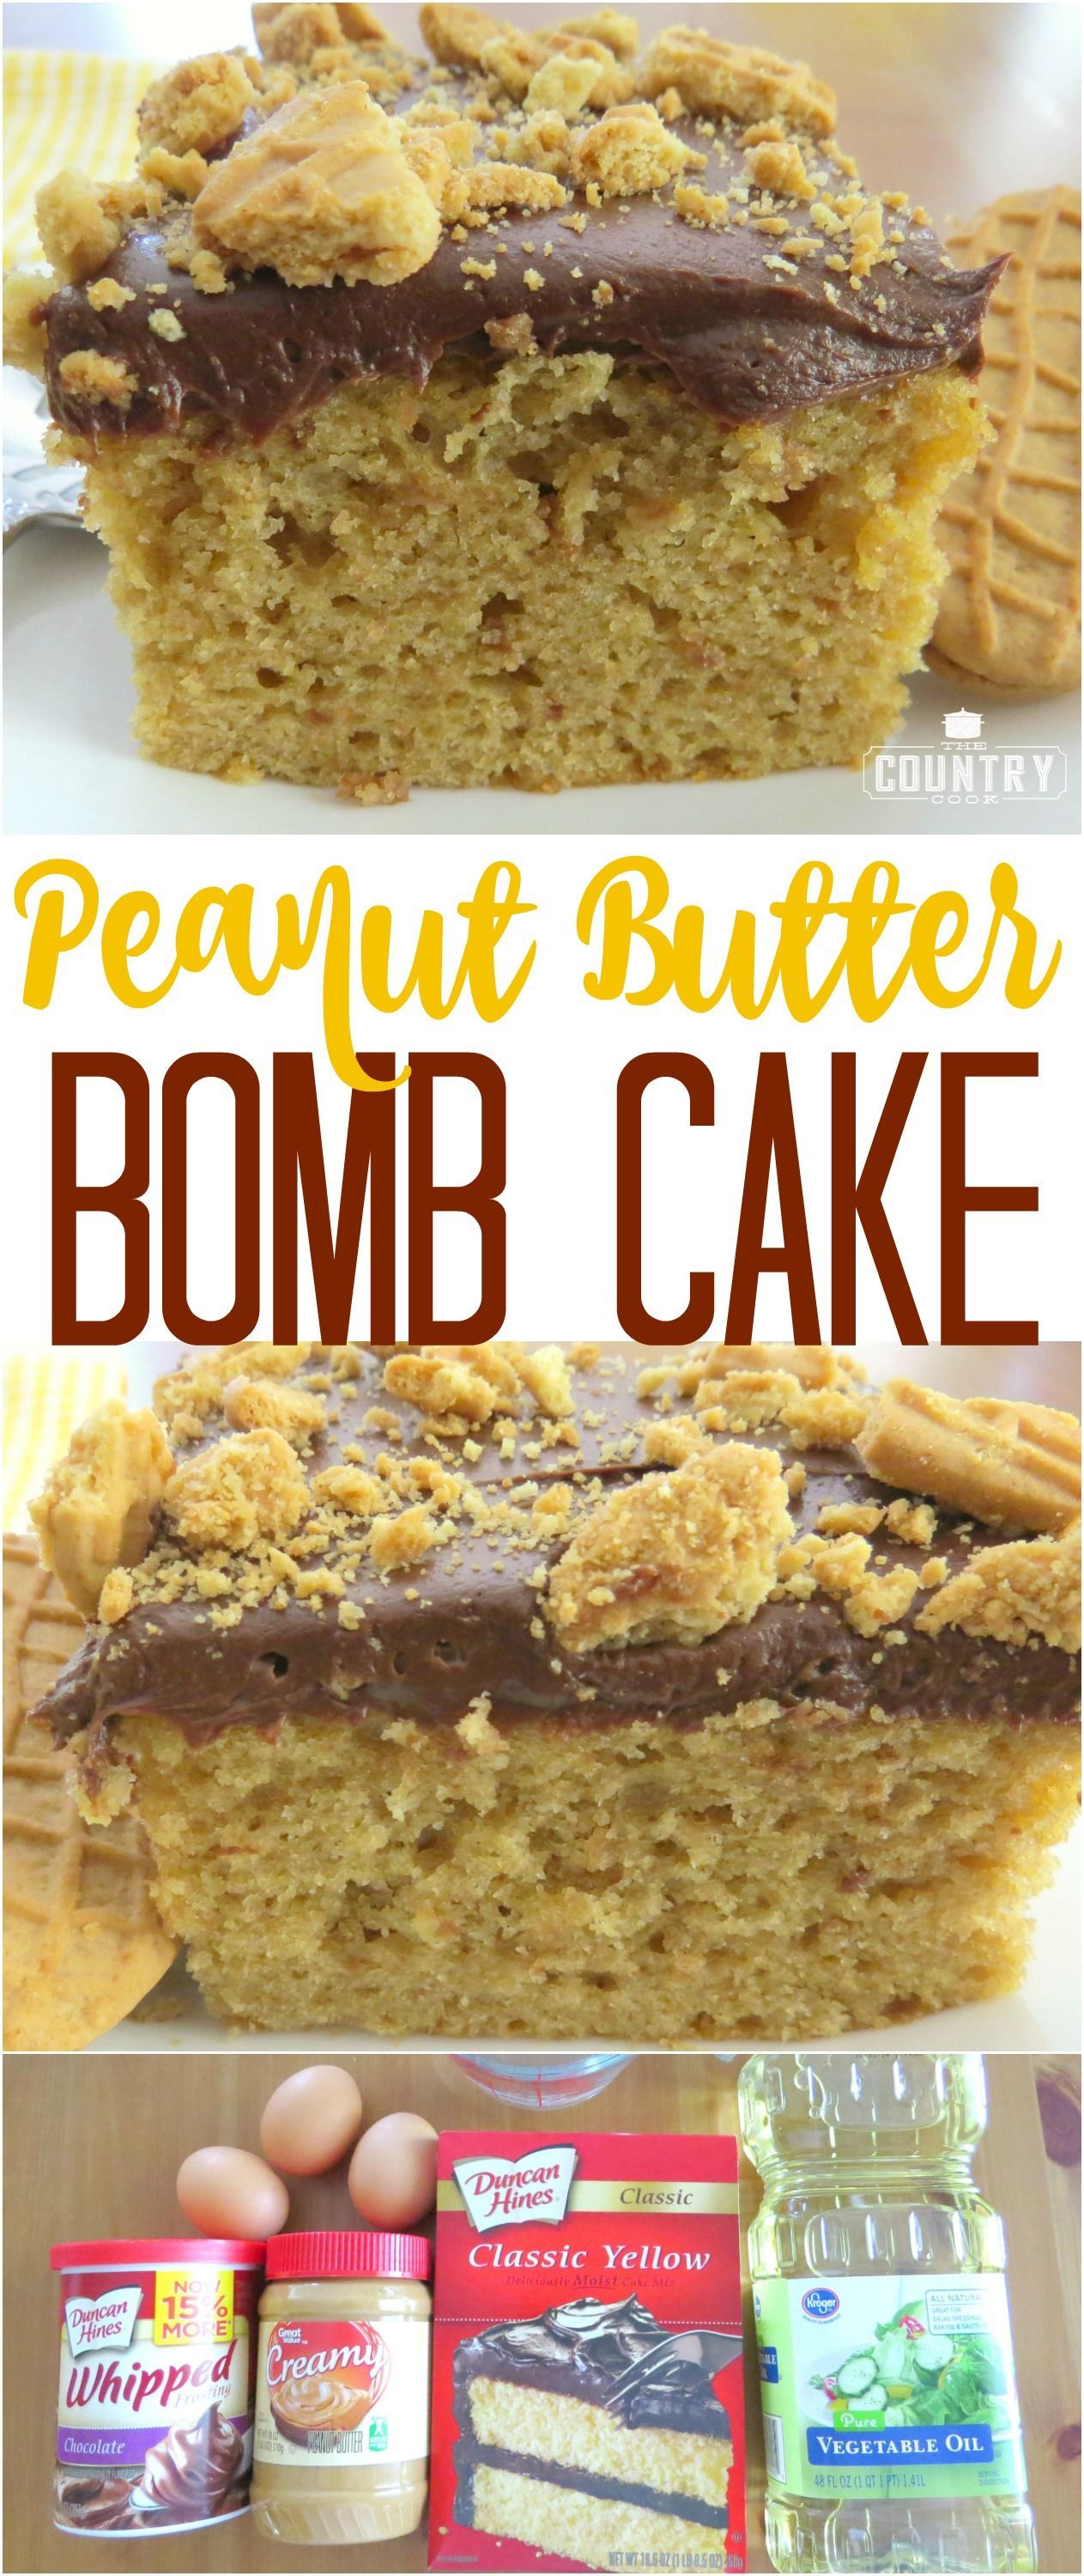 Peanut Butter Bomb Cake recipe from The Country Cook